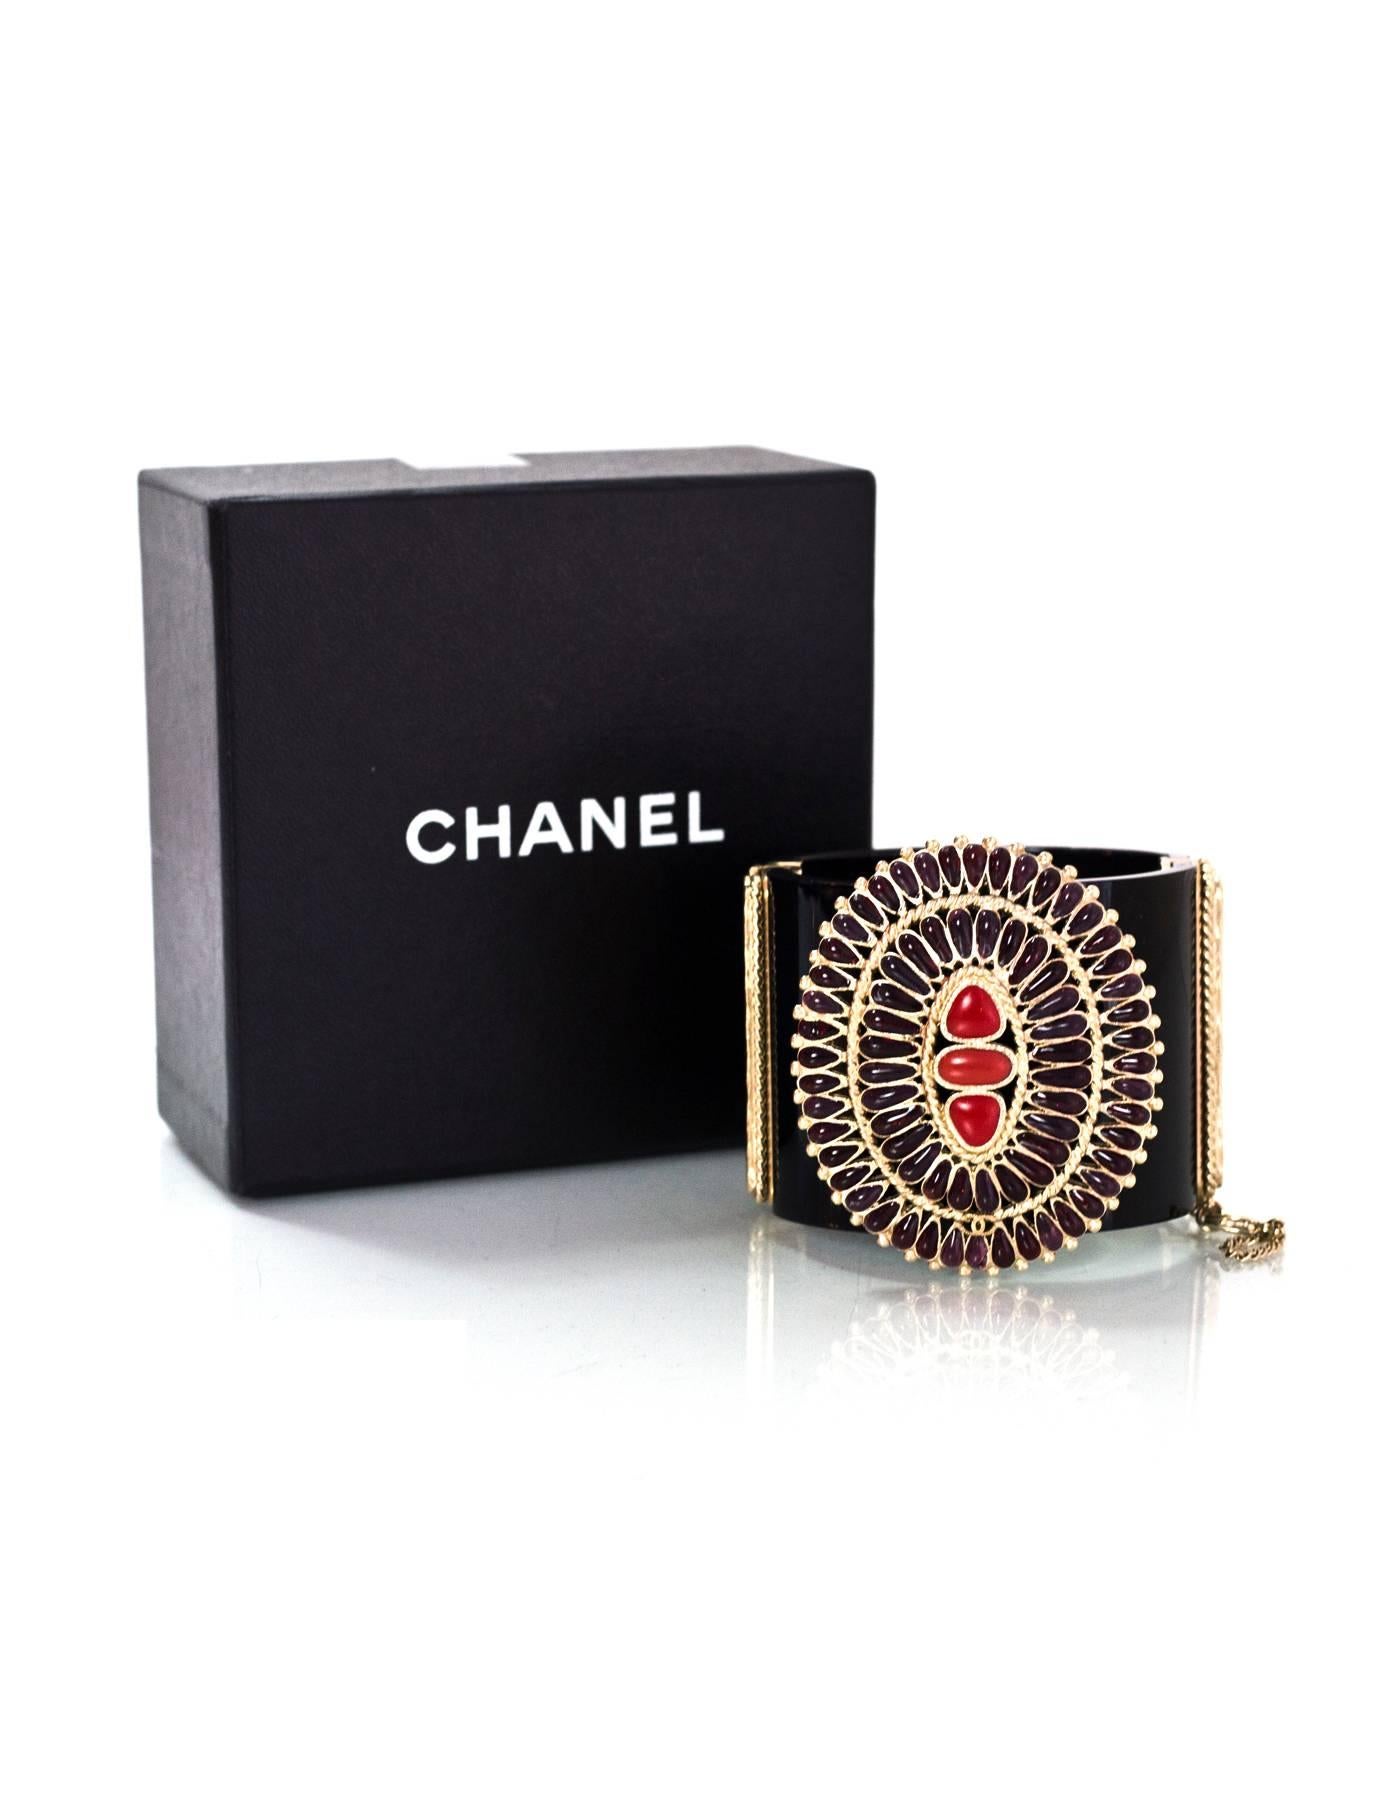 Chanel Black and Red Paris/Dallas 2014 Cuff Bracelet with Box 4